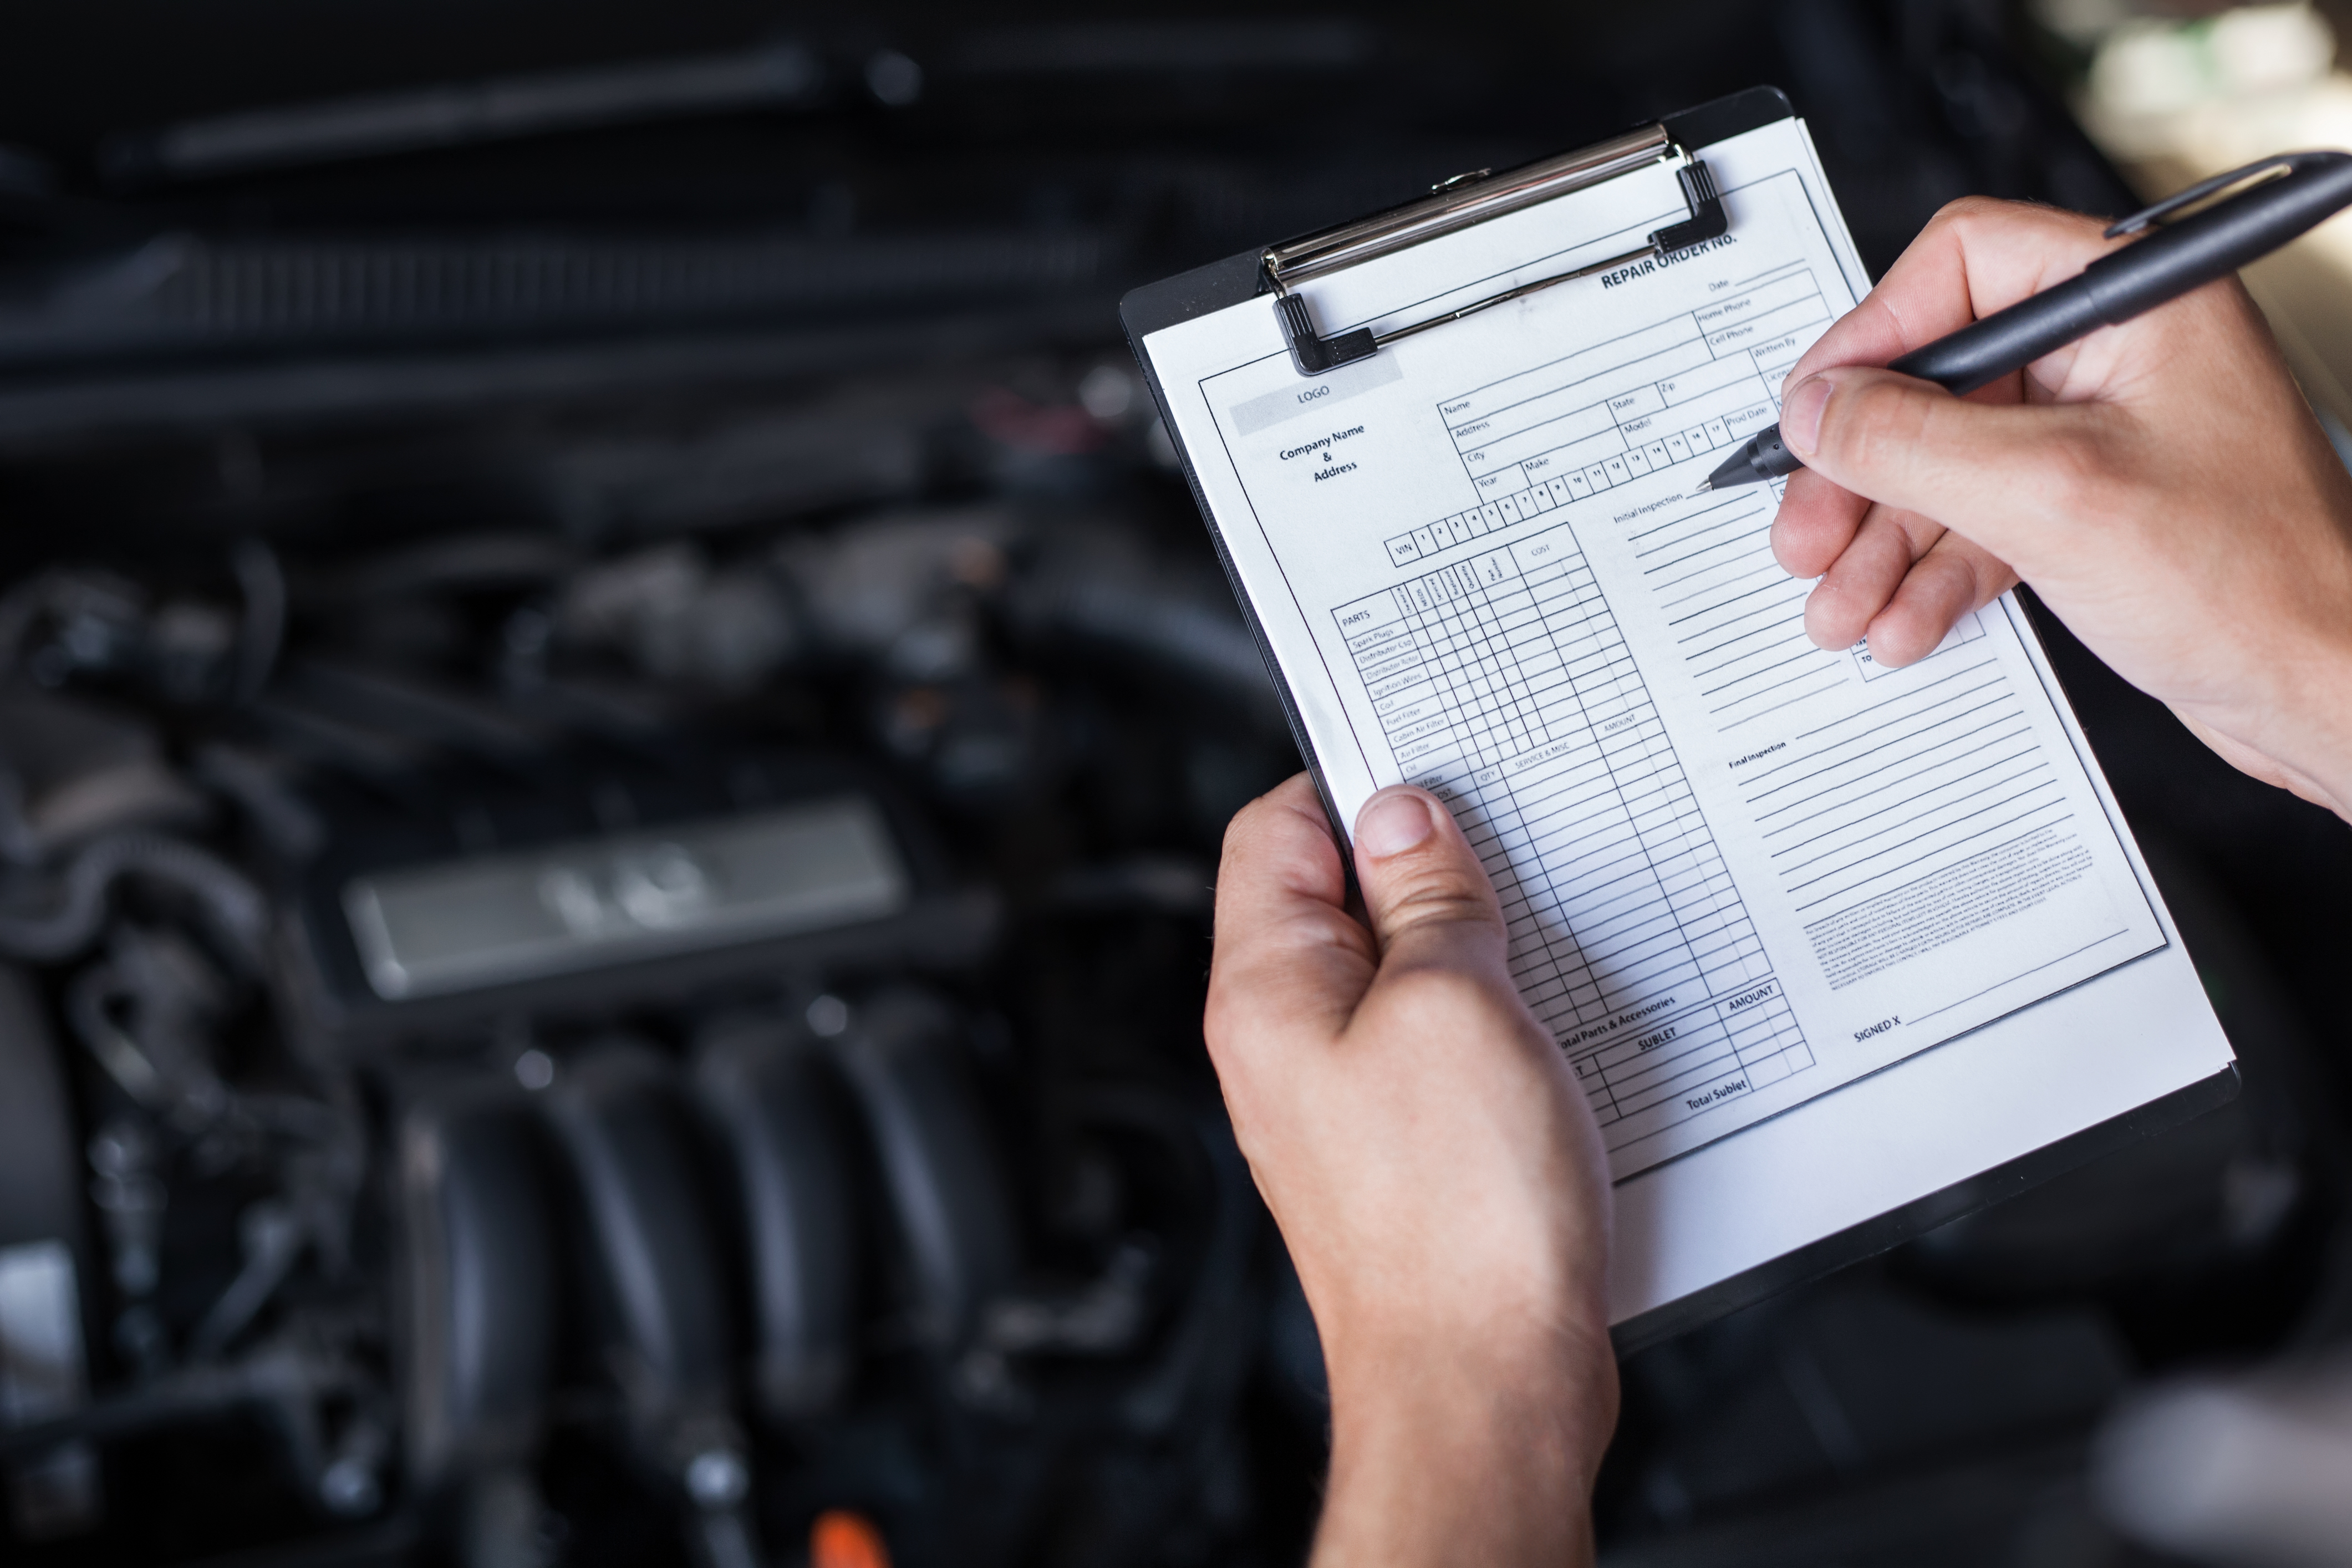 Vehicle inspection checklist with car engine in background